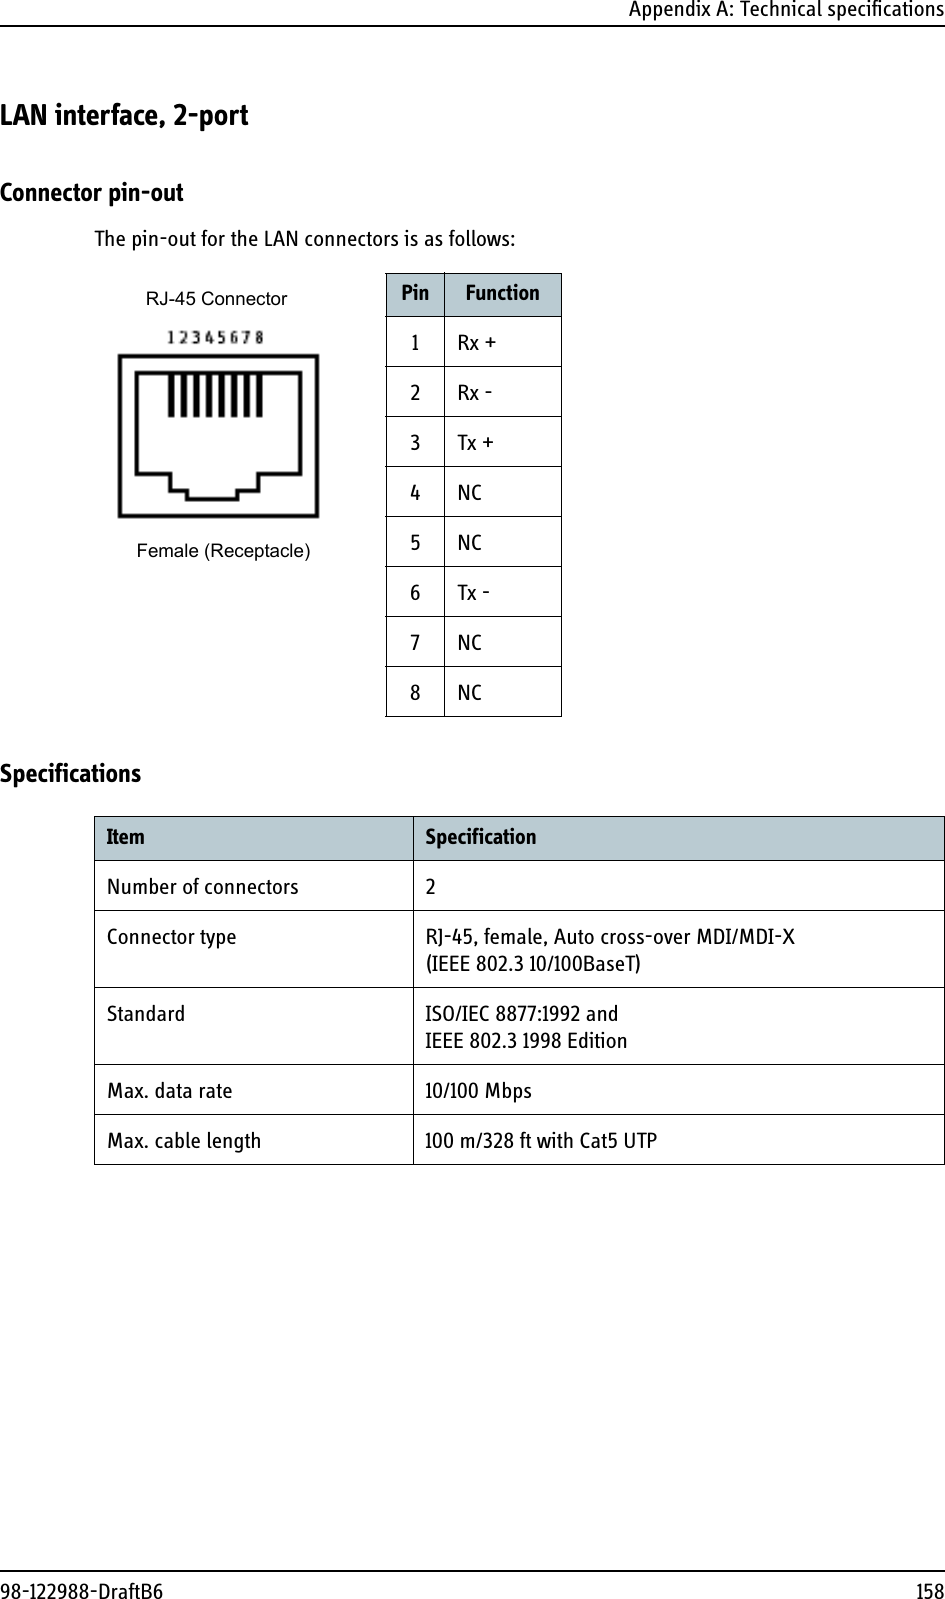 Appendix A: Technical specifications98-122988-DraftB6 158LAN interface, 2-portConnector pin-outThe pin-out for the LAN connectors is as follows:SpecificationsPin Function1Rx +2Rx -3Tx +4NC5NC6Tx -7NC8NCRJ-45 ConnectorFemale (Receptacle)Item SpecificationNumber of connectors 2Connector type RJ-45, female, Auto cross-over MDI/MDI-X (IEEE 802.3 10/100BaseT)Standard ISO/IEC 8877:1992 and IEEE 802.3 1998 EditionMax. data rate 10/100 MbpsMax. cable length 100 m/328 ft with Cat5 UTP